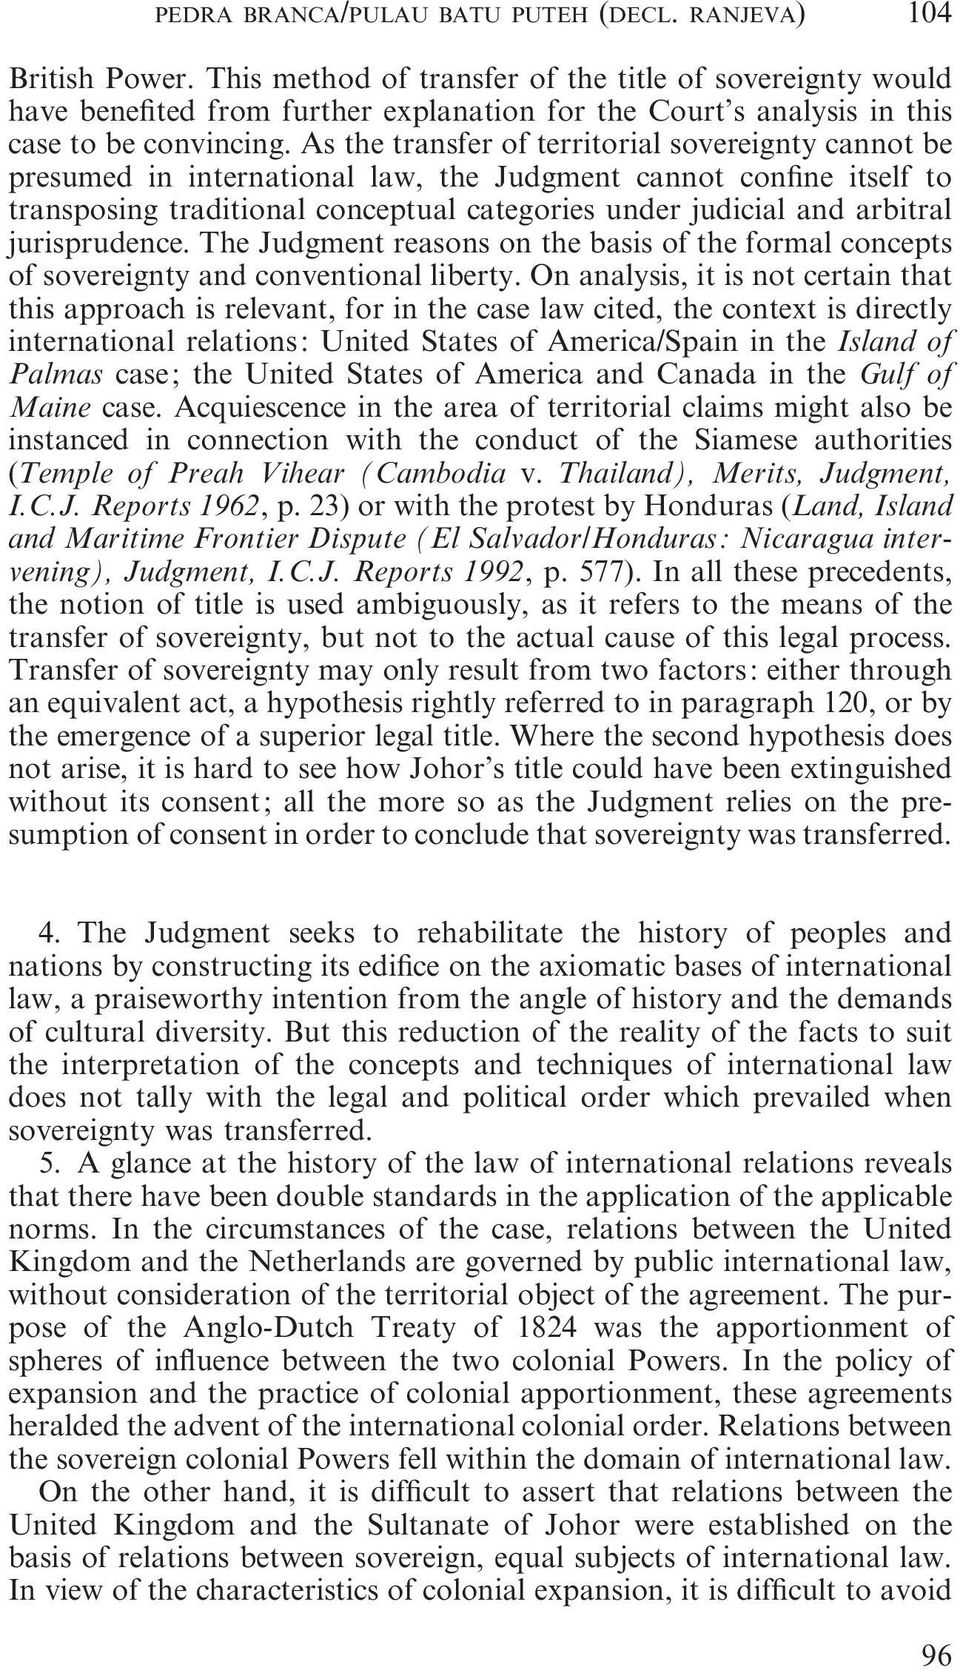 As the transfer of territorial sovereignty cannot be presumed in international law, the Judgment cannot confine itself to transposing traditional conceptual categories under judicial and arbitral